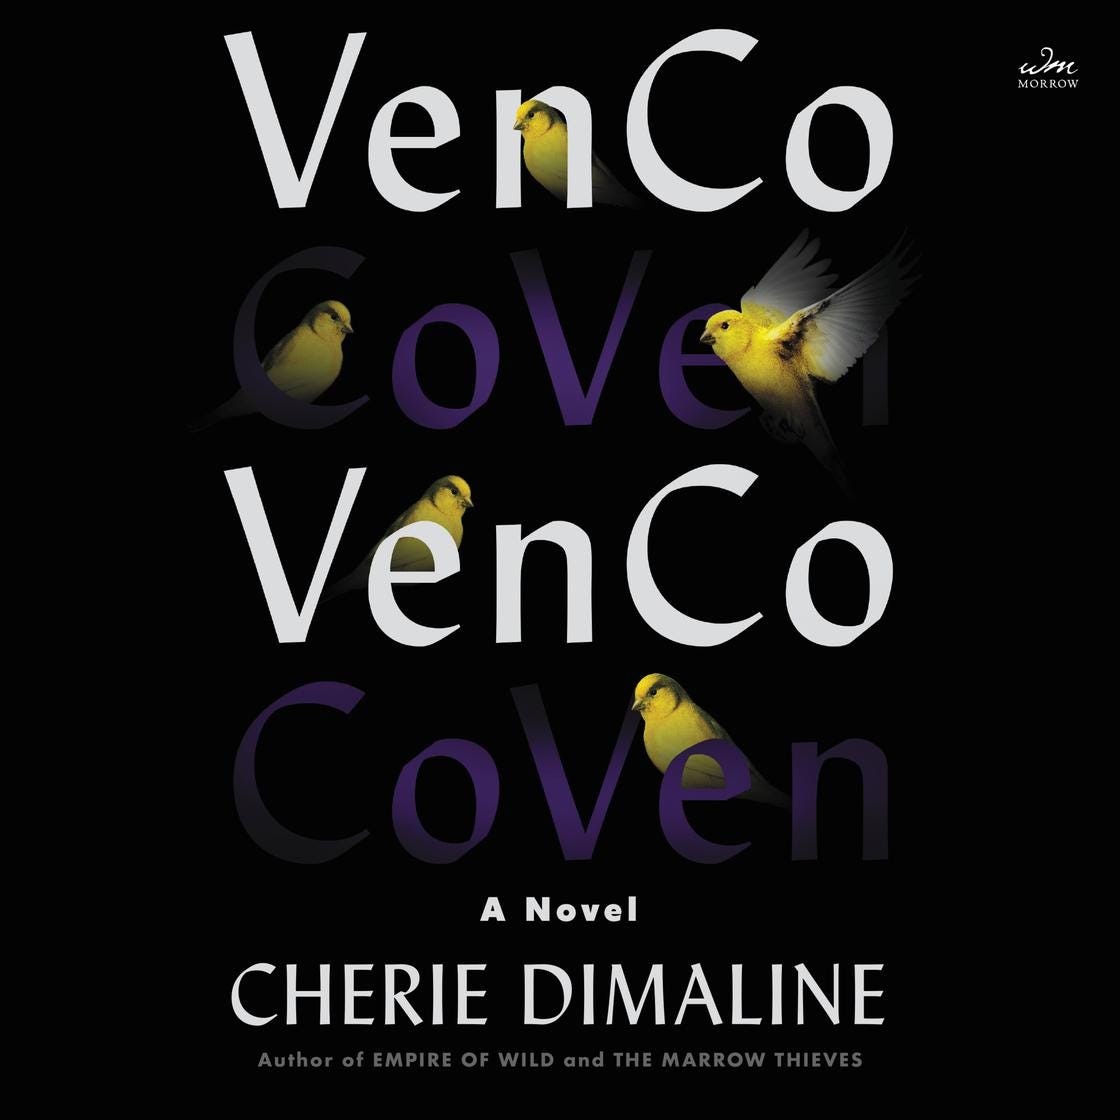 The audiobook cover of VenCo.